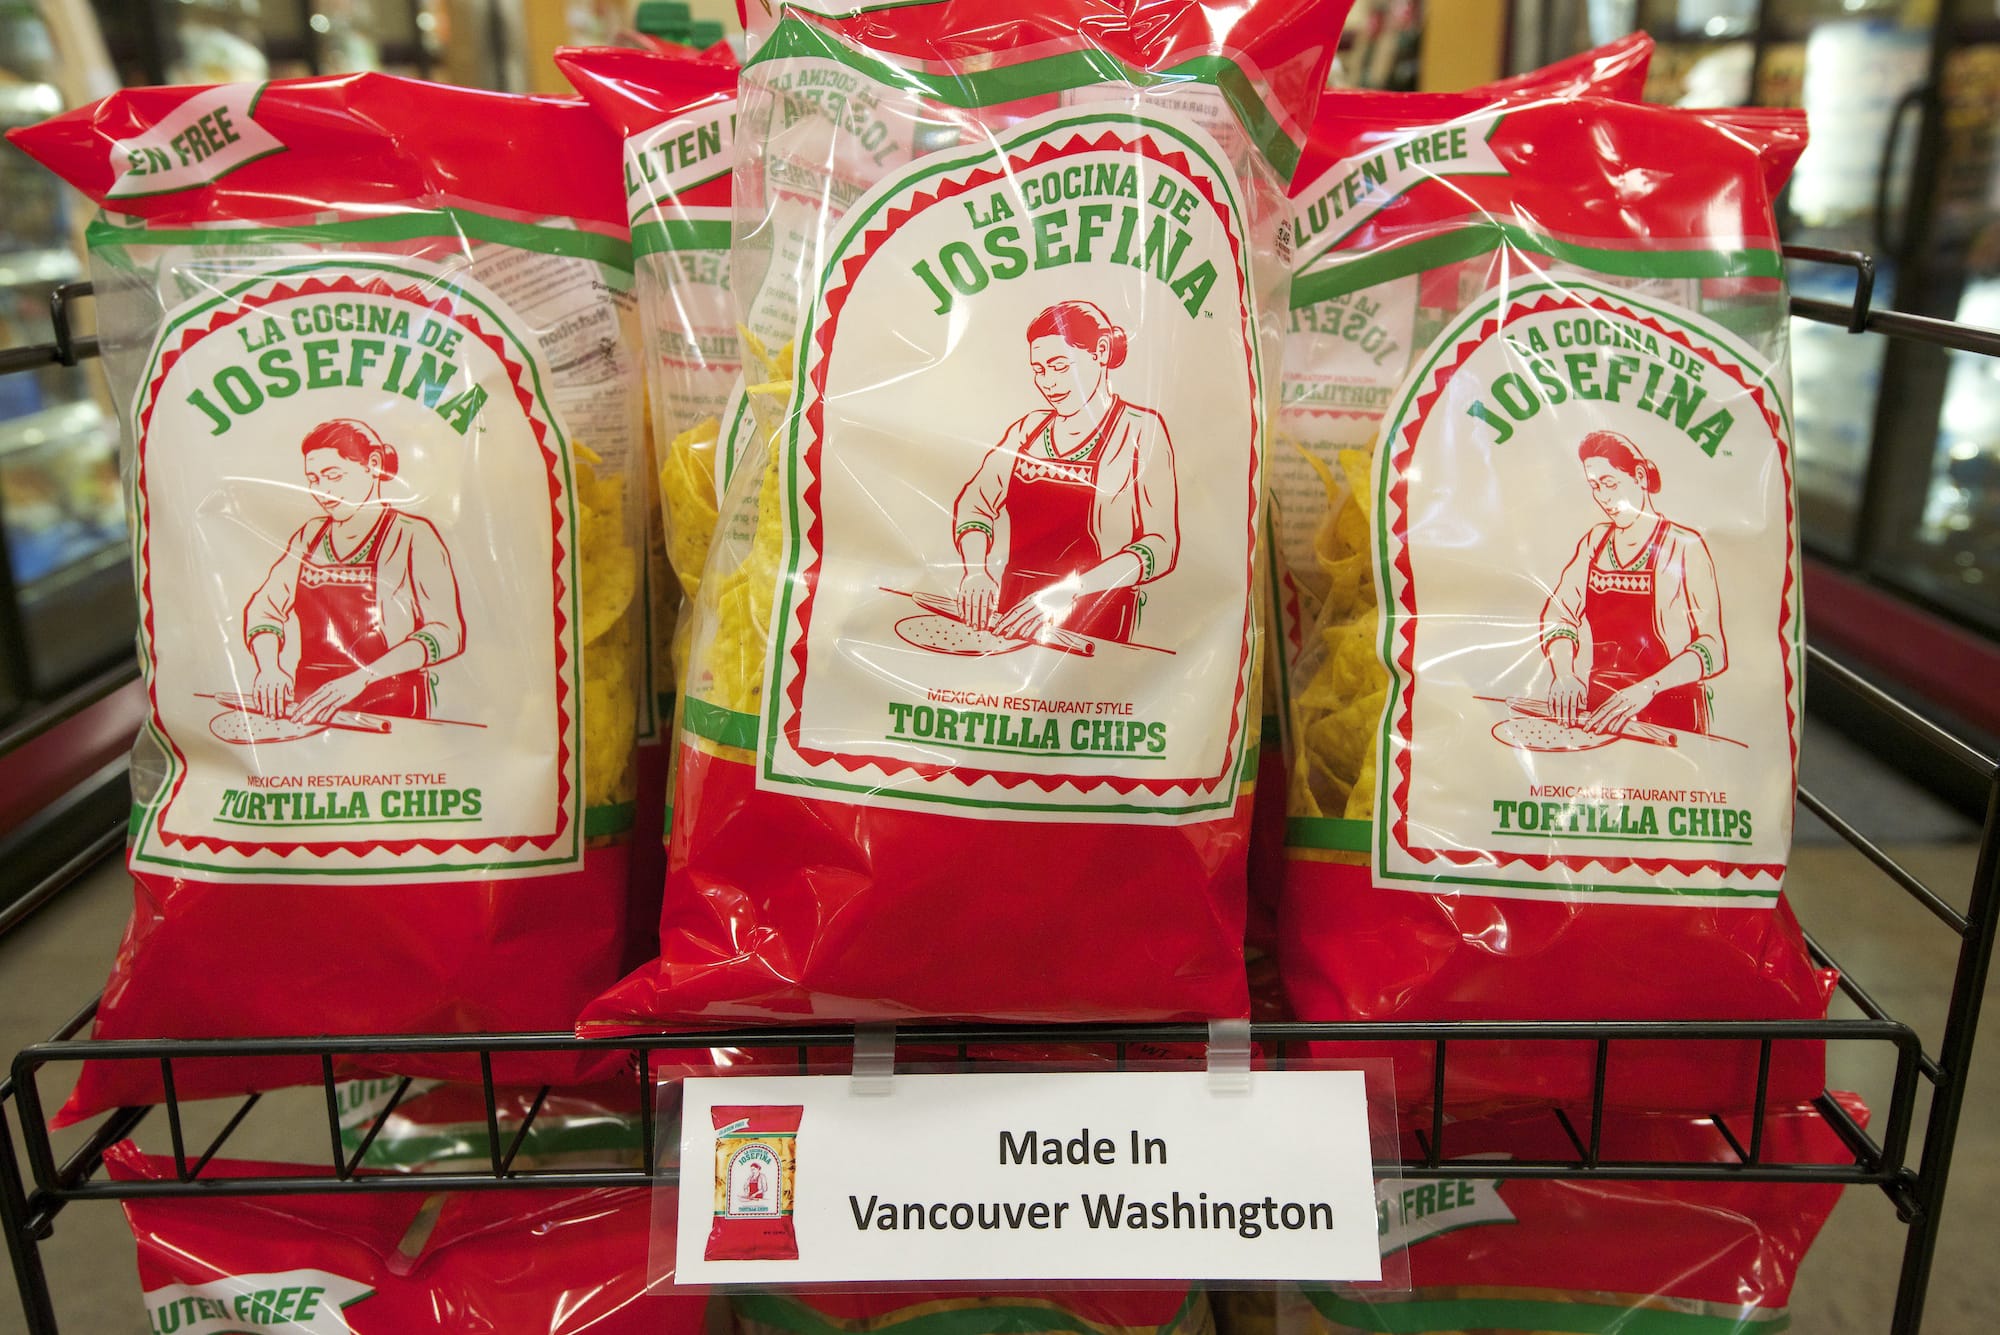 Frito Lay has introduced Josefina chips, on display here at Fred Meyer's Salmon Creek store, for sale only in the Northwest. The chip package doesn't identify Josefinas as a Frito Lay product.